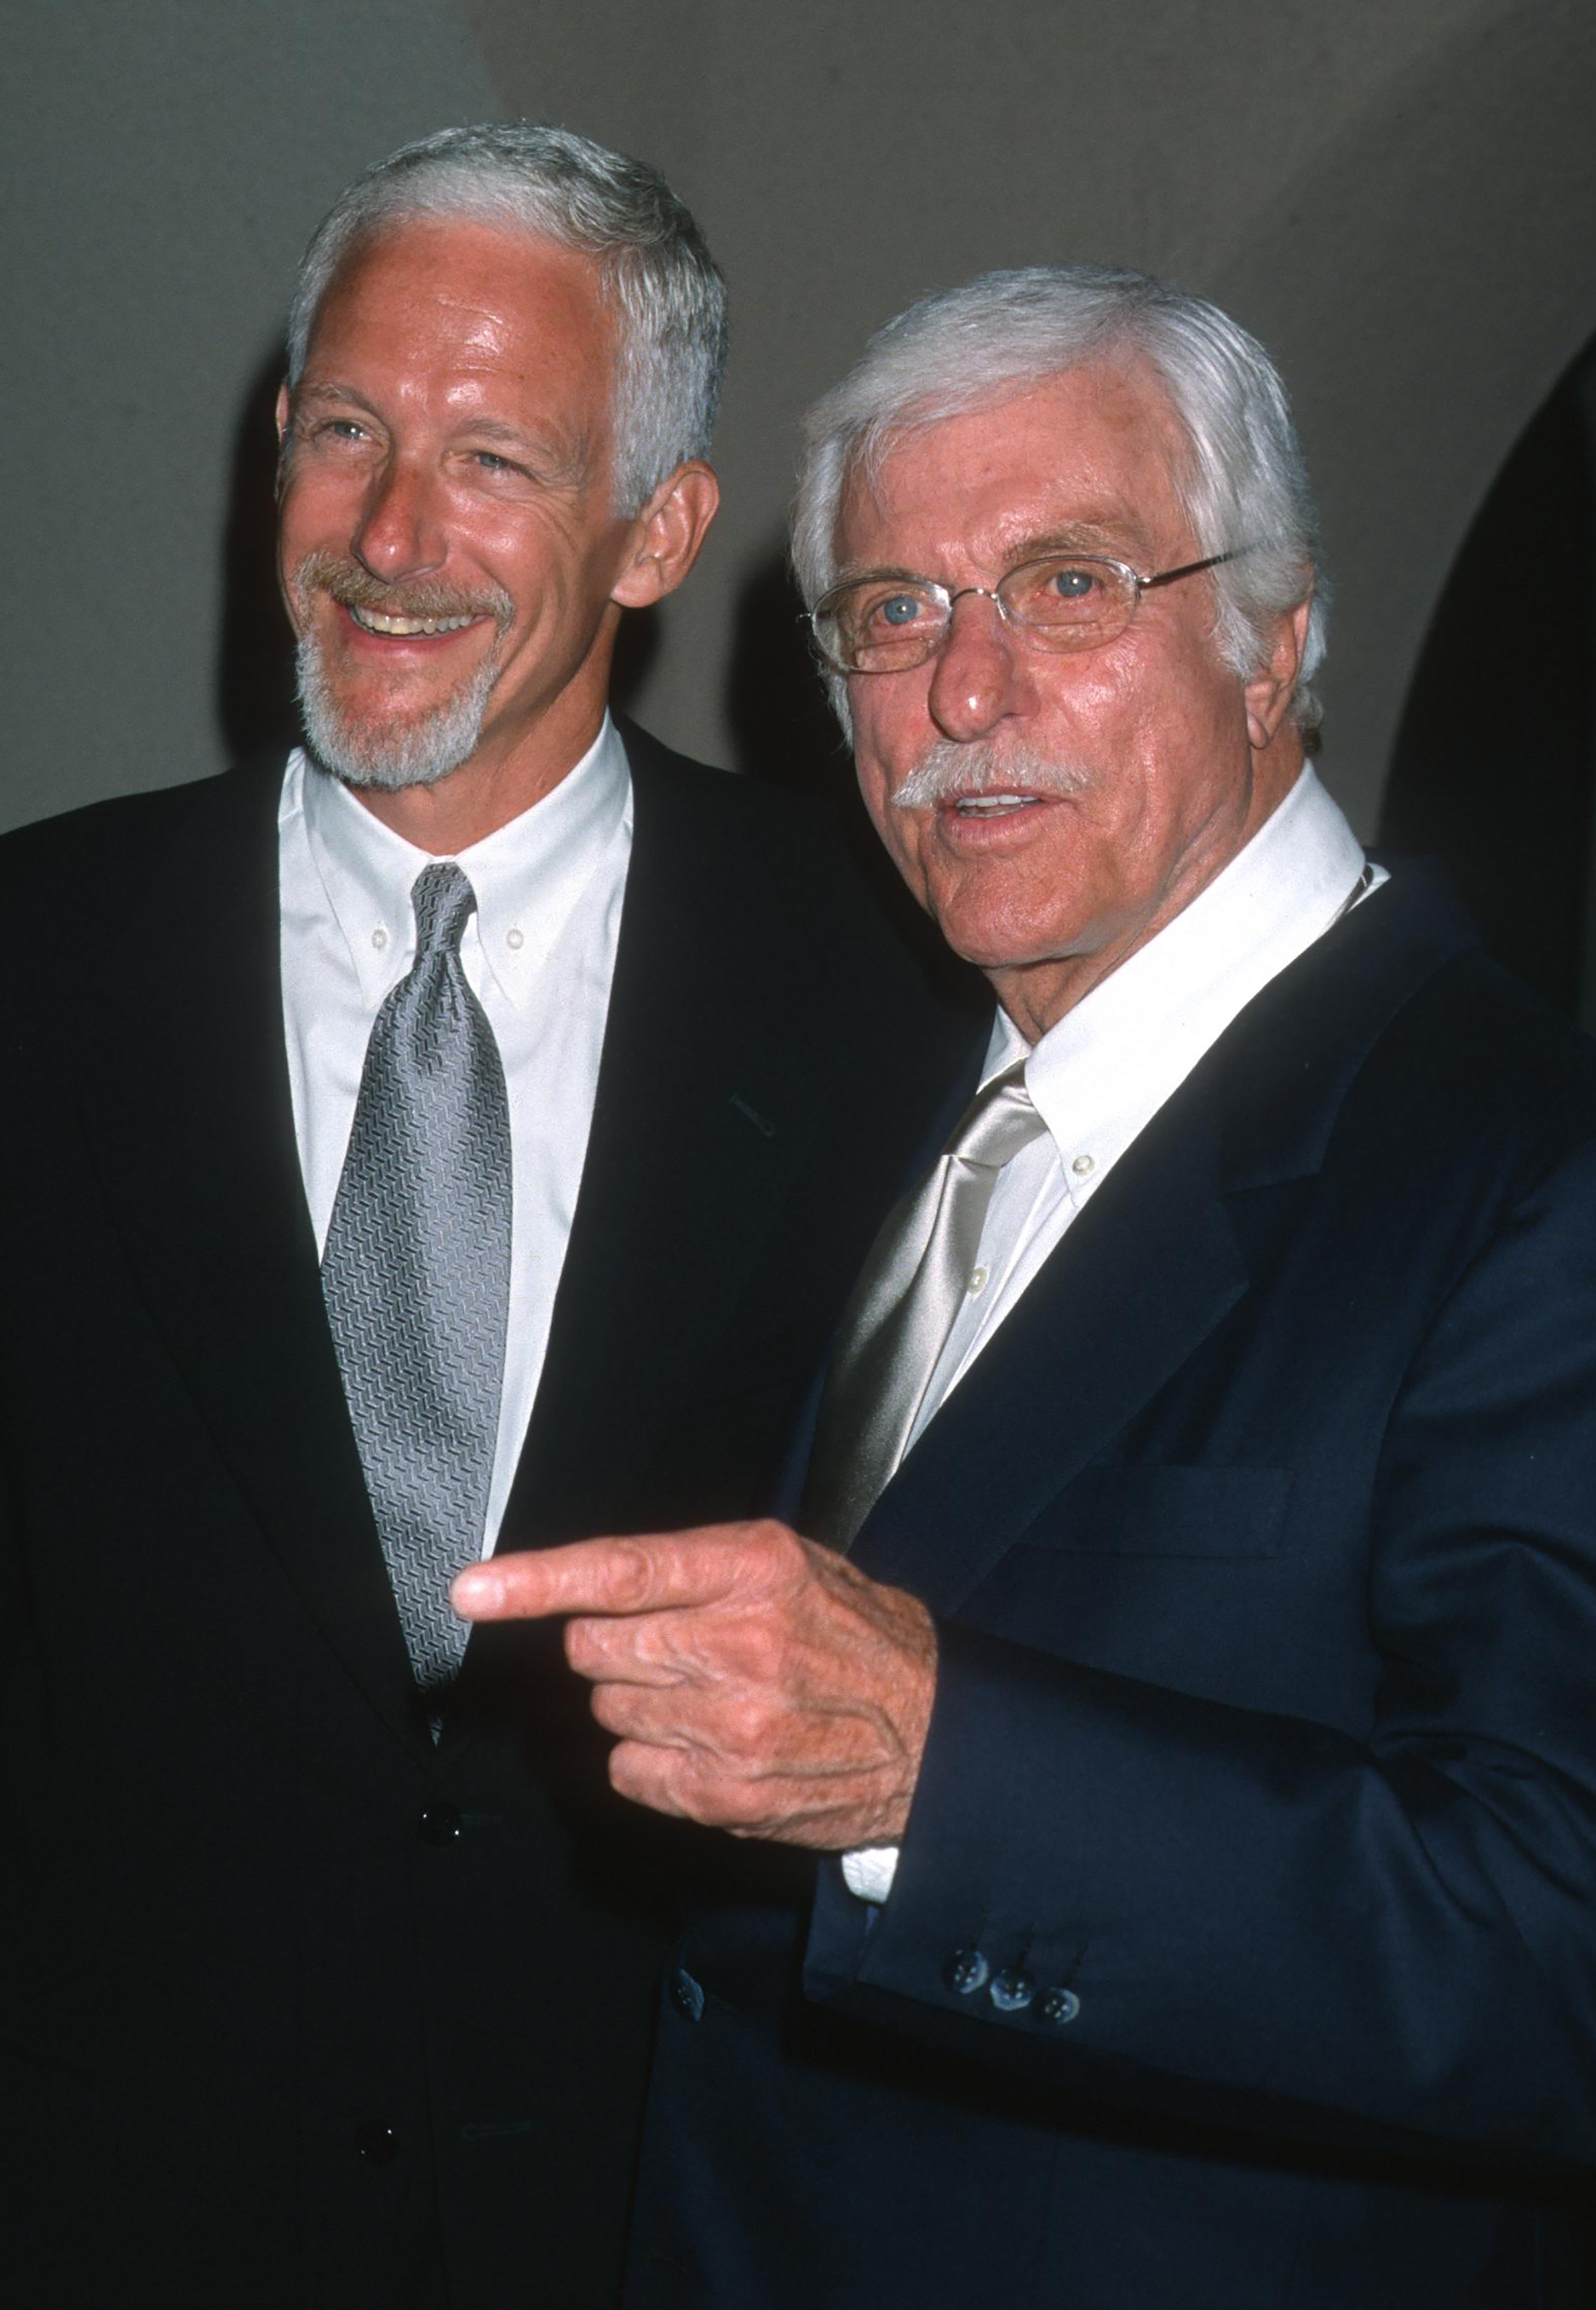 Dick Van Dyke and his son Chris Van Dyke attend Summer Television Critic Association Awards Luncheon at the Ritz Carlton Hotel on July 15, 2000, in Pasadena, California. | Source: Getty Images